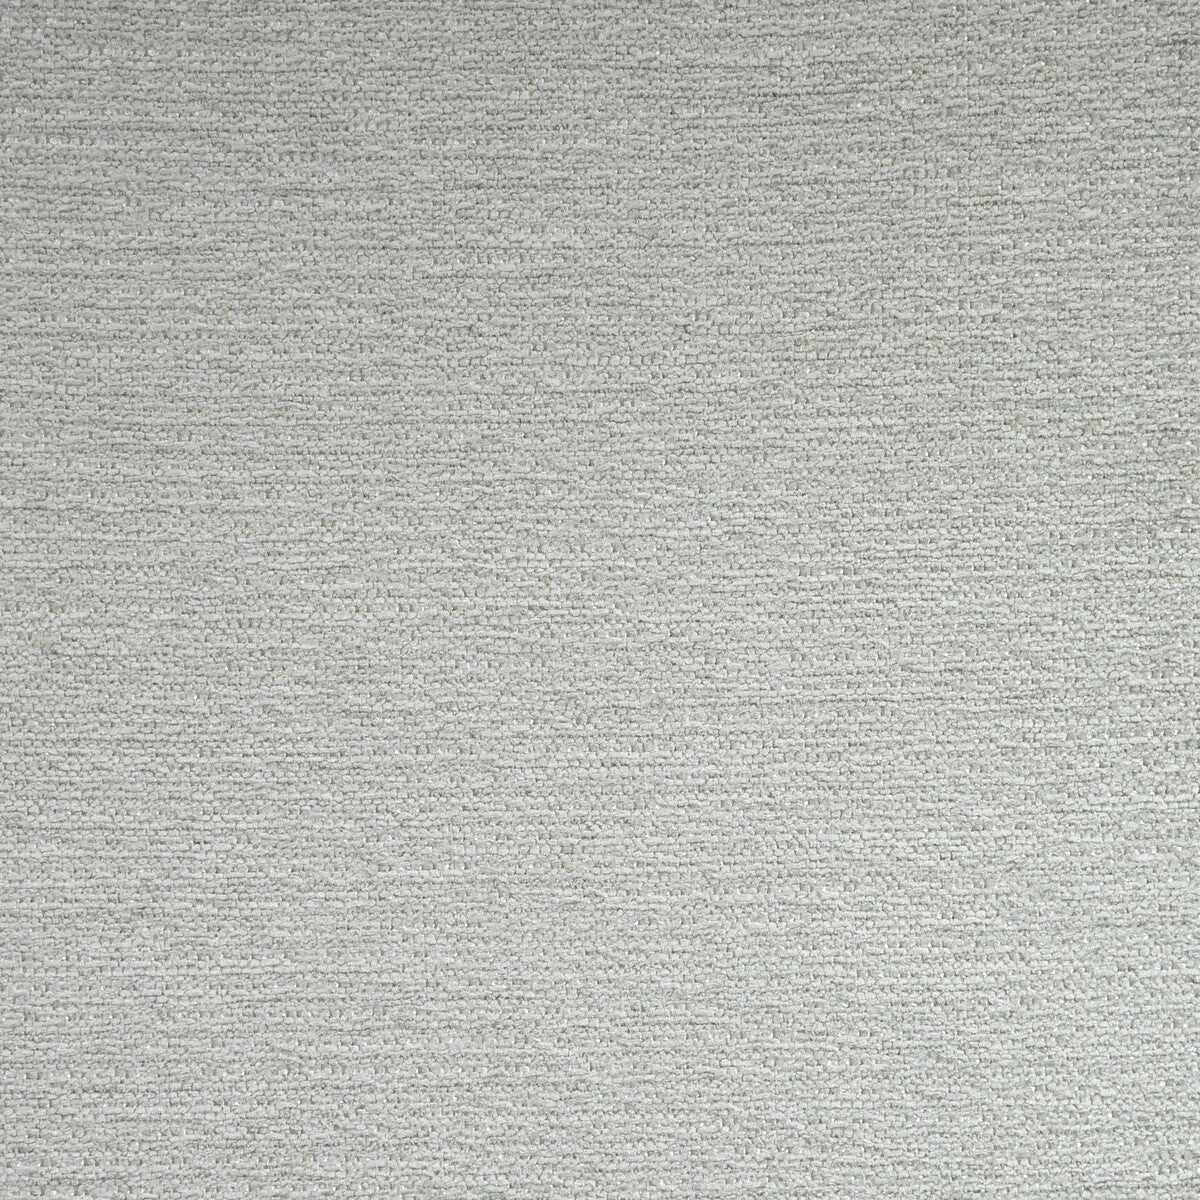 Love Me fabric in ice color - pattern 33553.111.0 - by Kravet Couture in the Modern Luxe collection